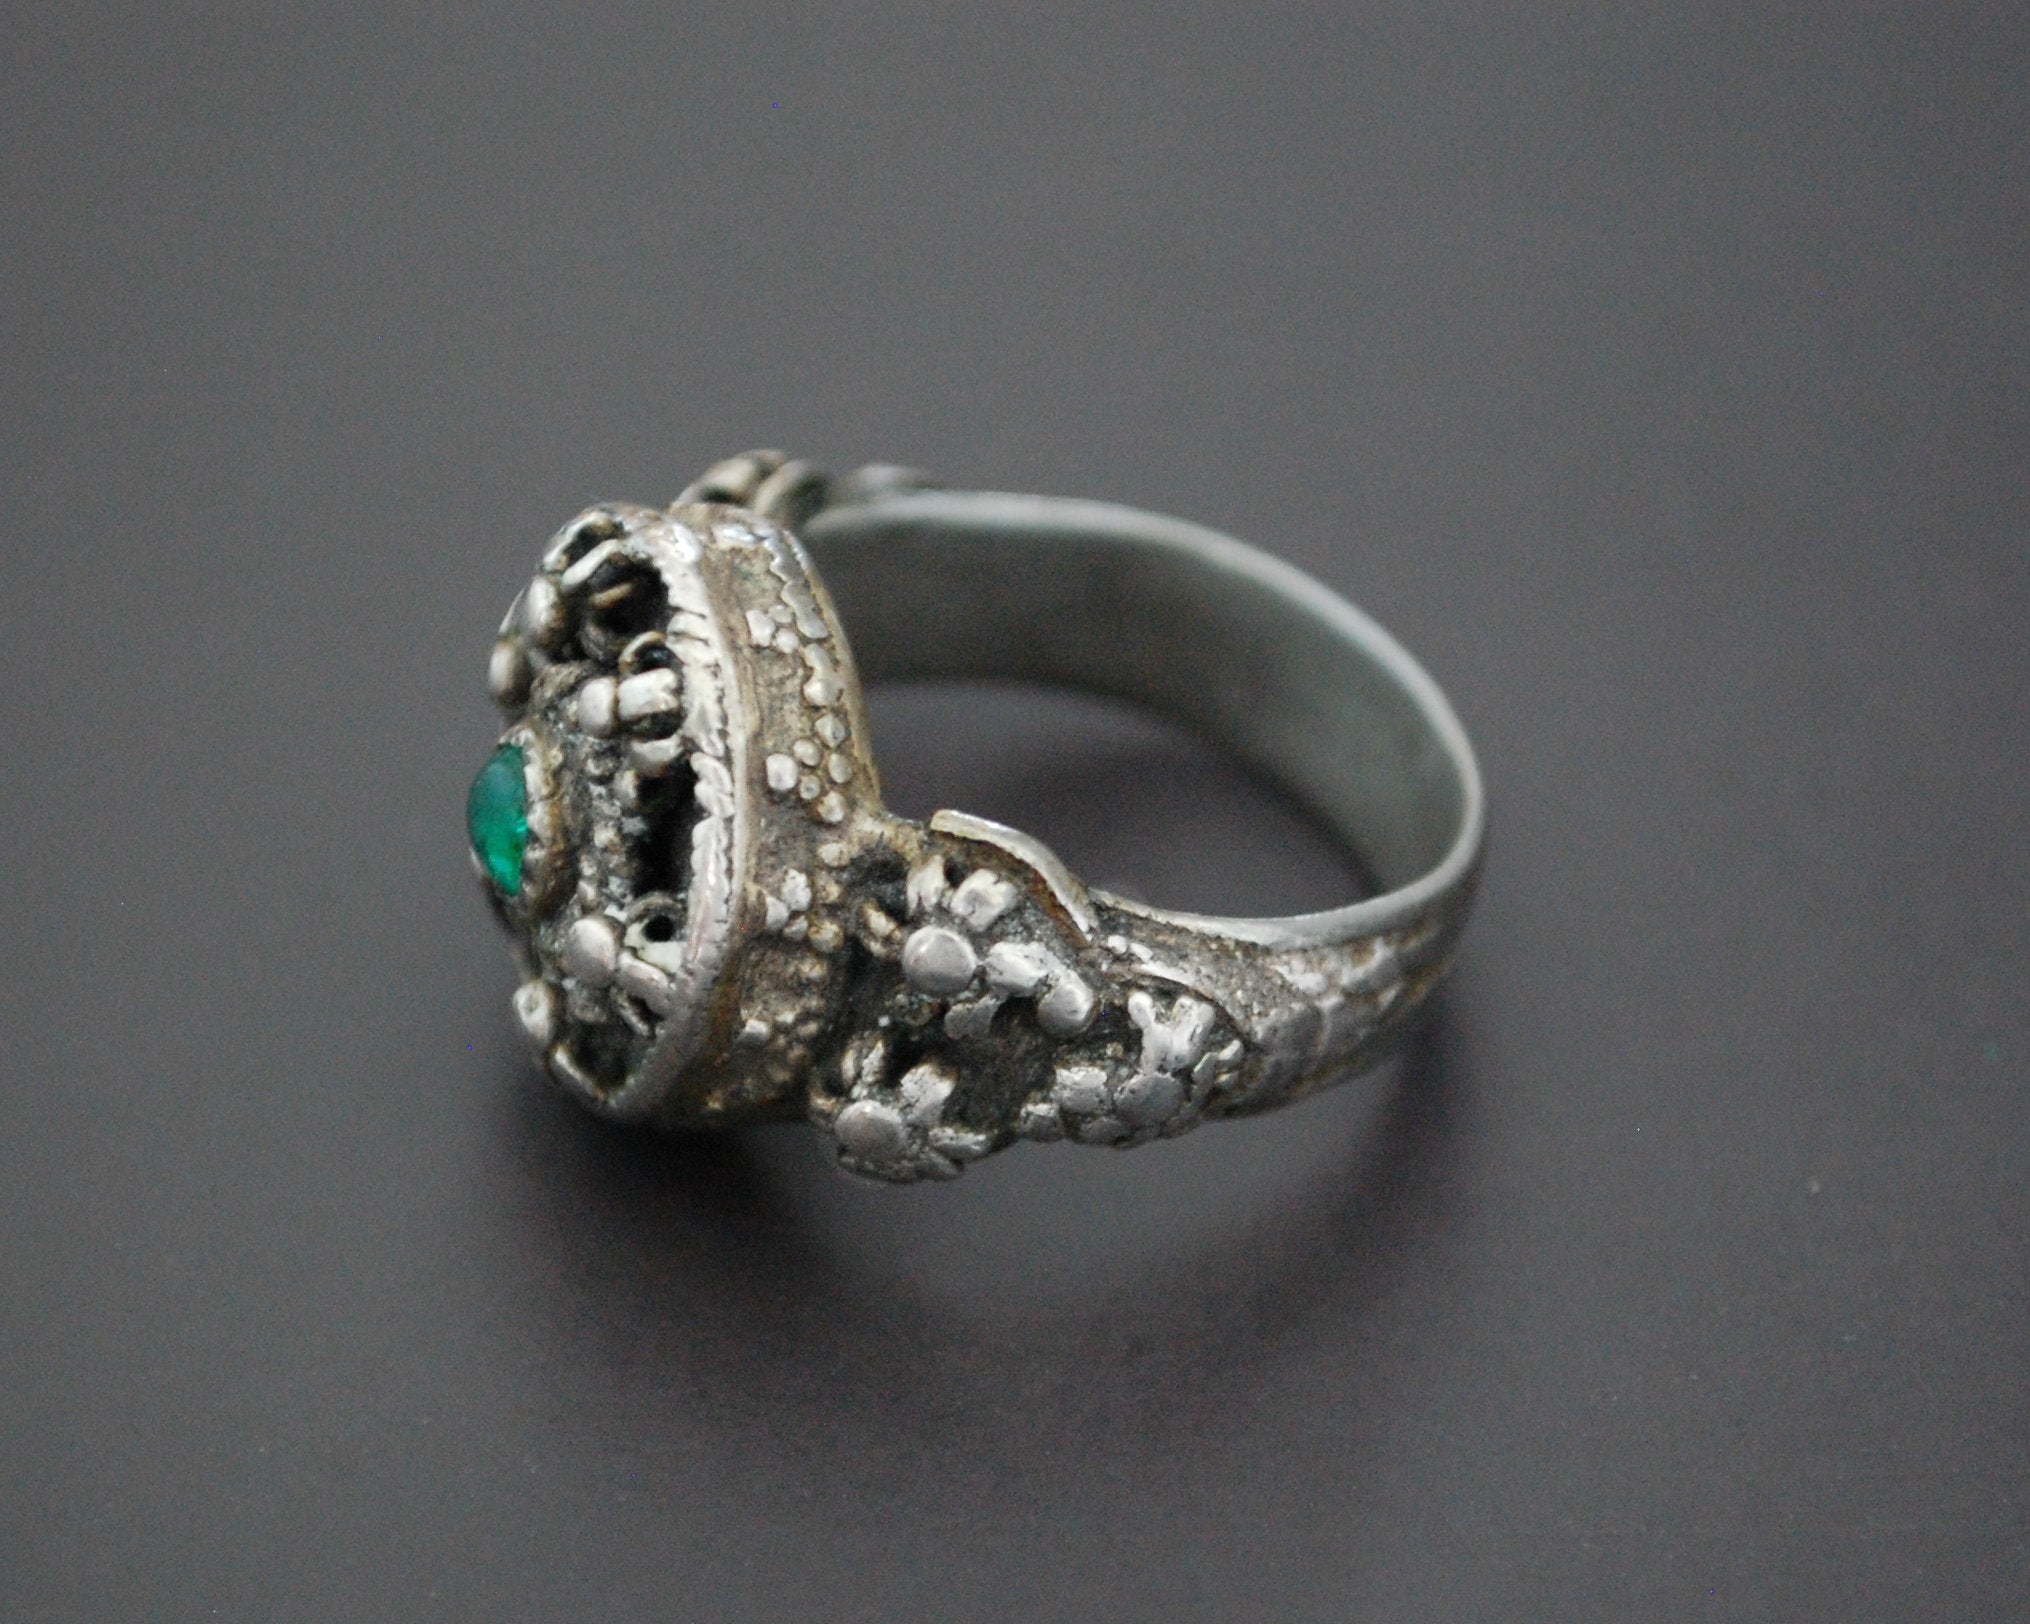 Antique Yemeni Ring with Green Glass - Size 9.5